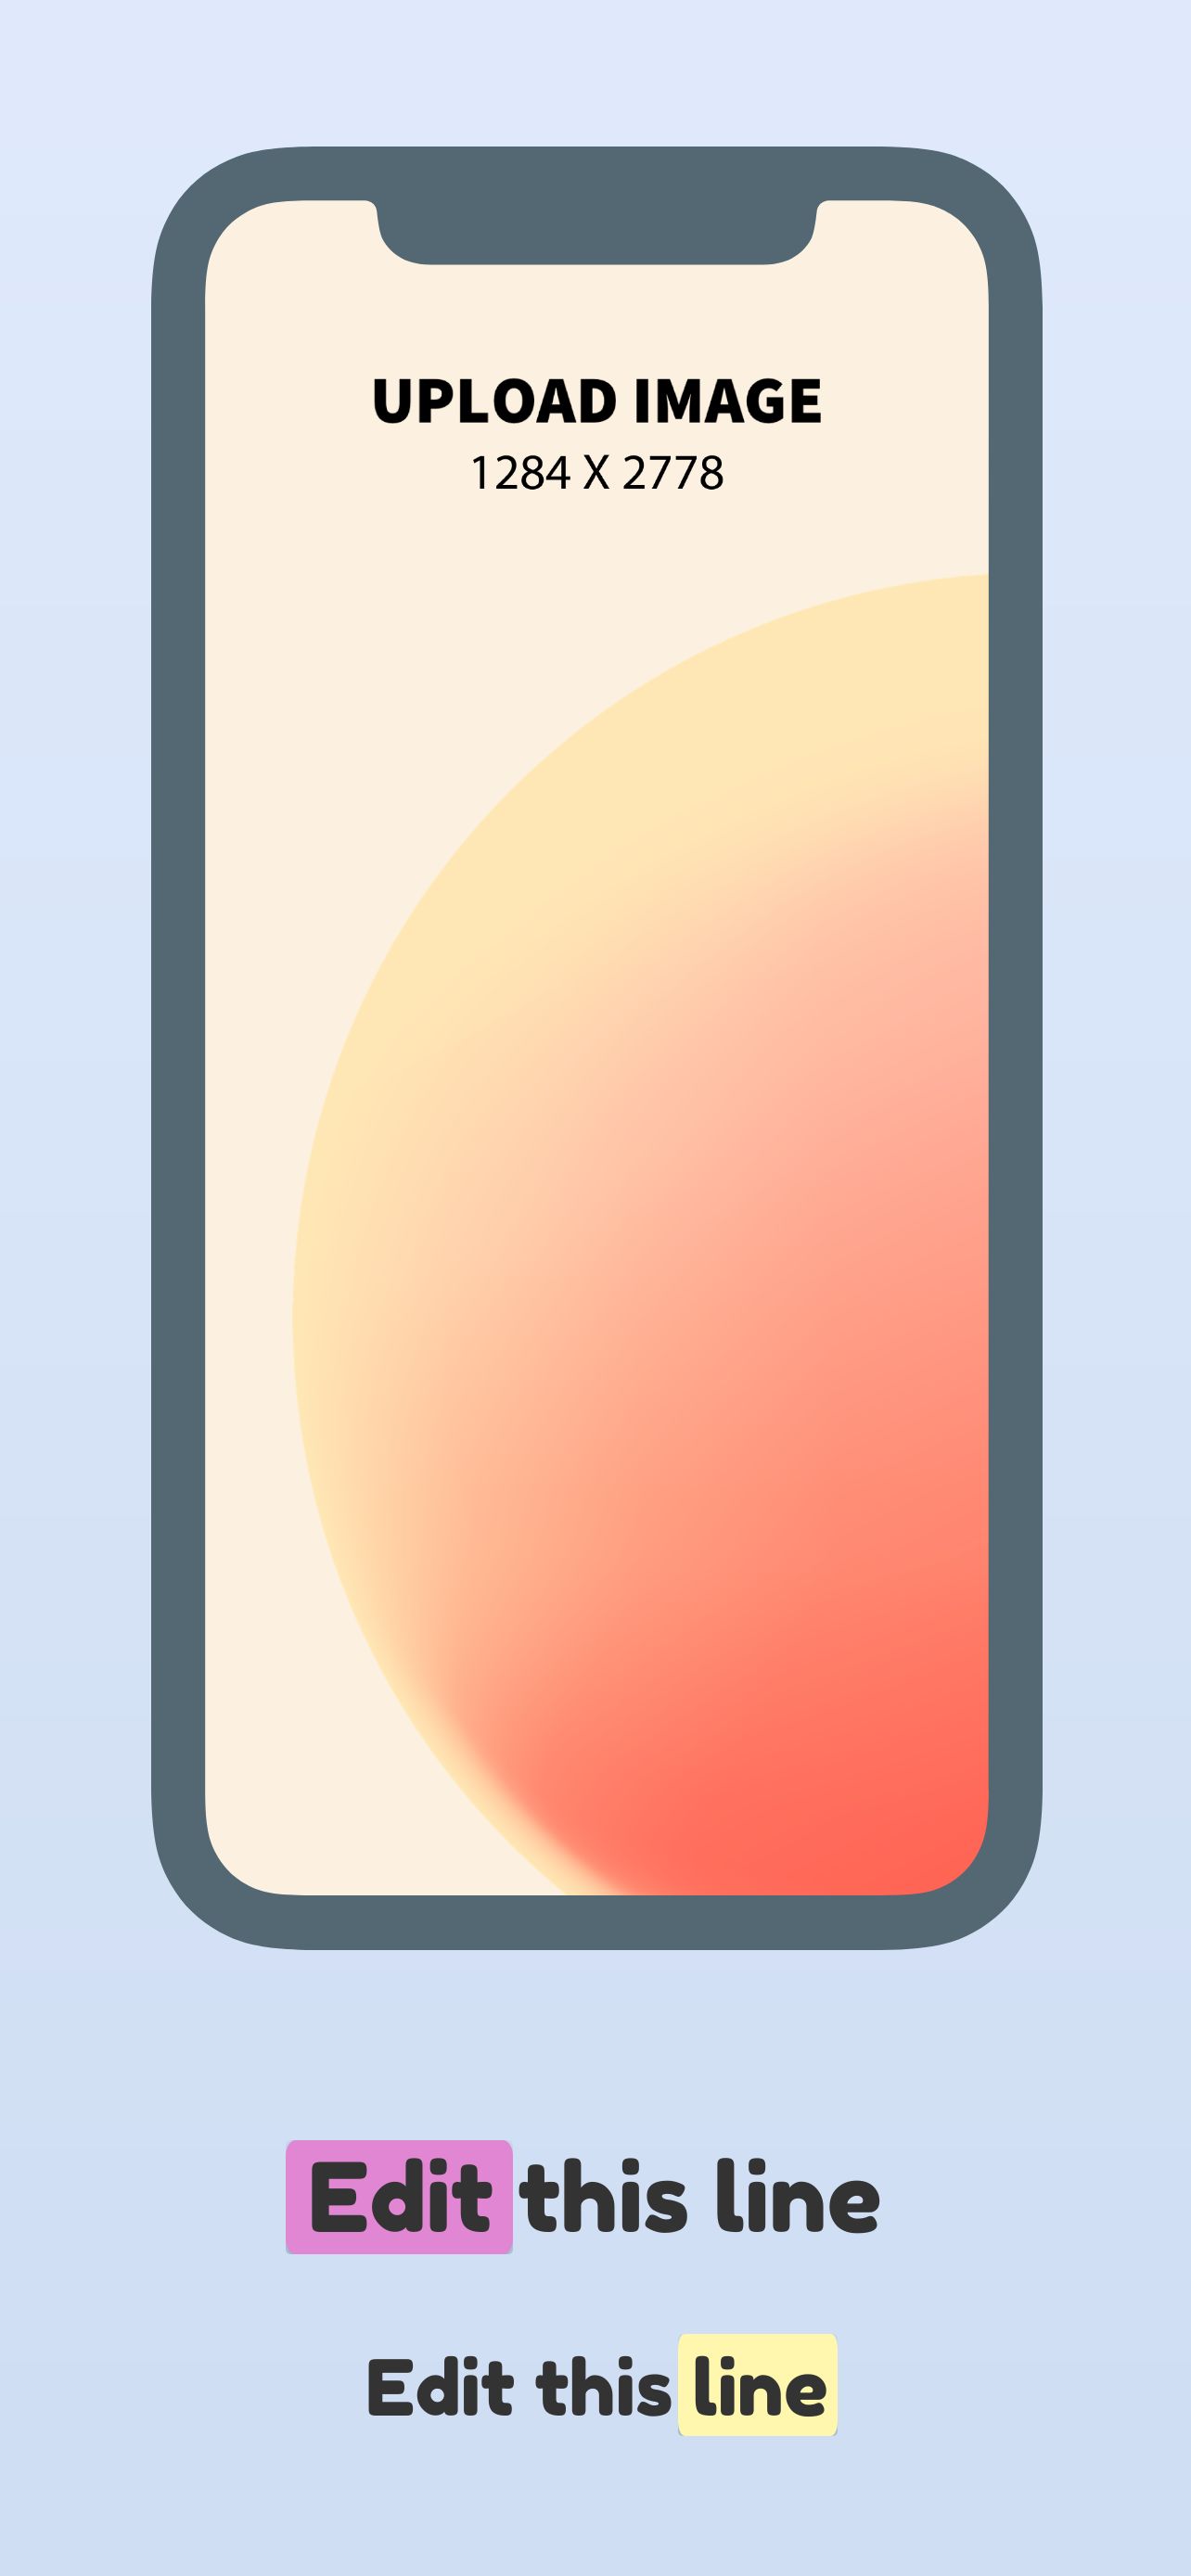 iPhone 12 Pro Max Screenshot 15 template. Quickly edit text, colors, images, and more for free.